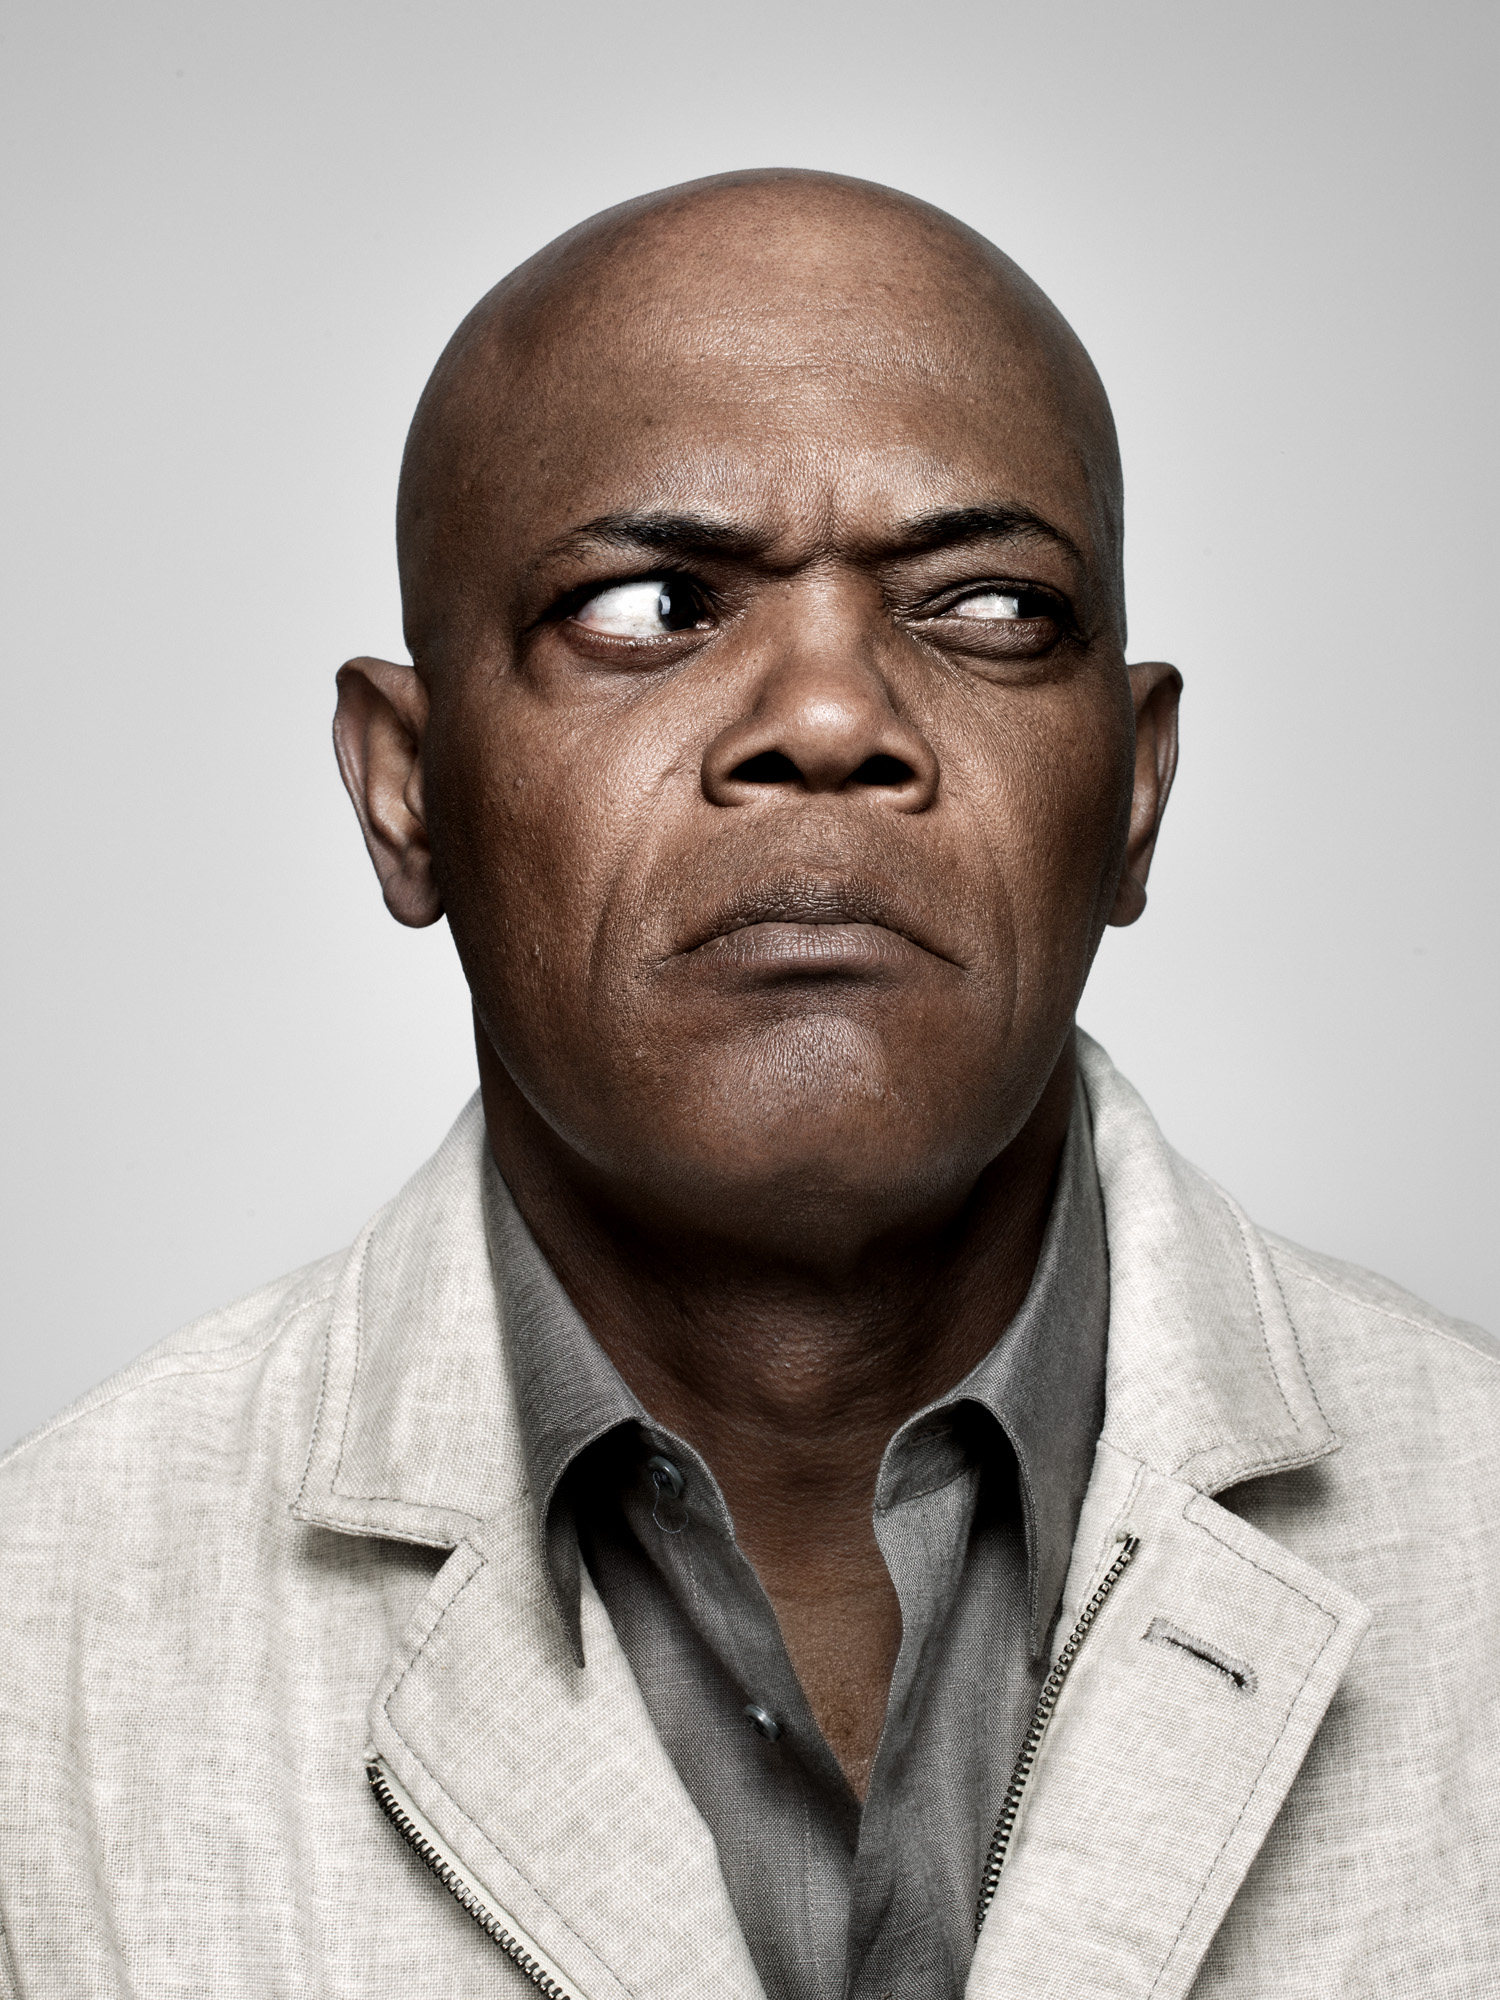 actor samuel l jackson has said that the popularity of oscar nominated 